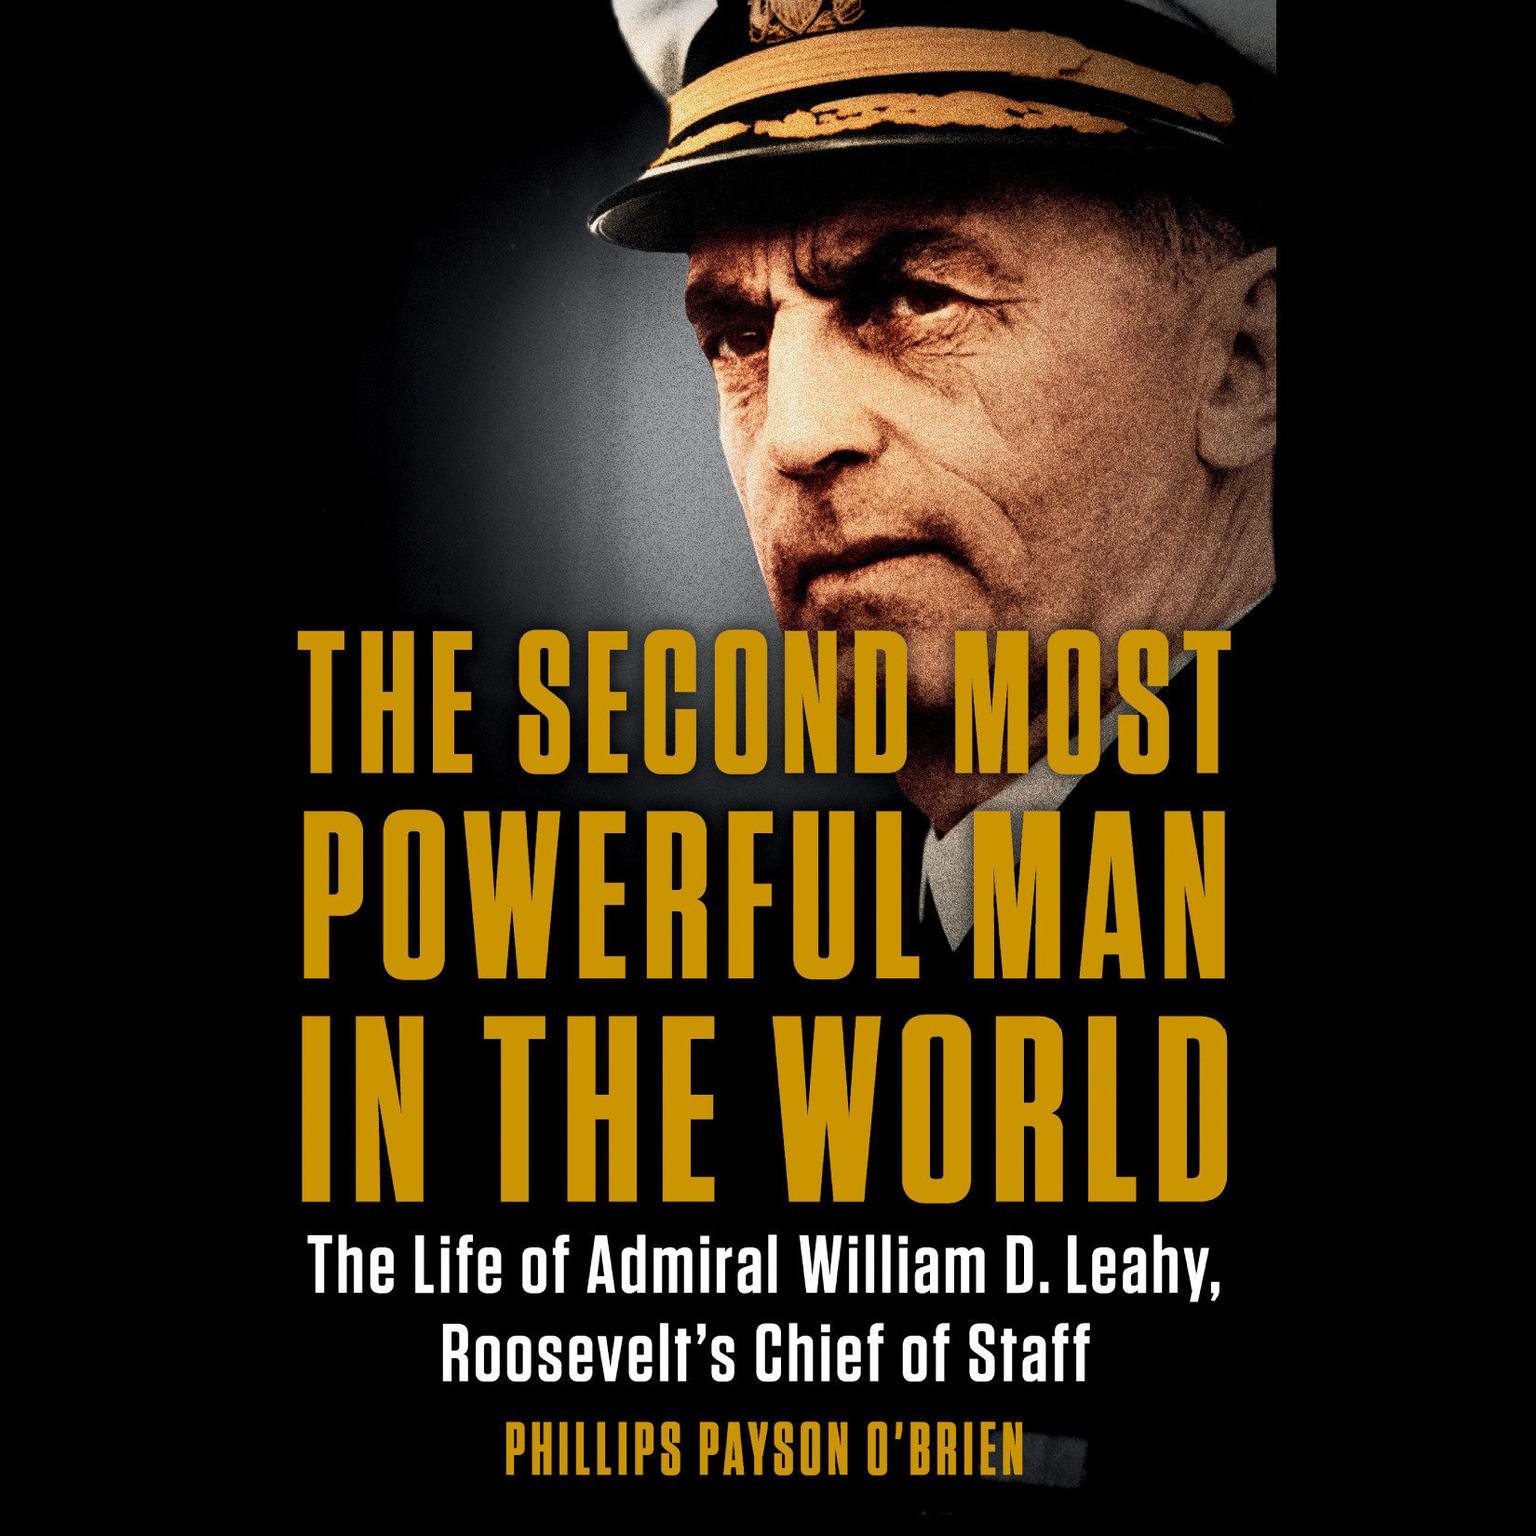 The Second Most Powerful Man in the World: The Life of Admiral William D. Leahy, Roosevelts Chief of Staff Audiobook, by Phillips Payson O'Brien